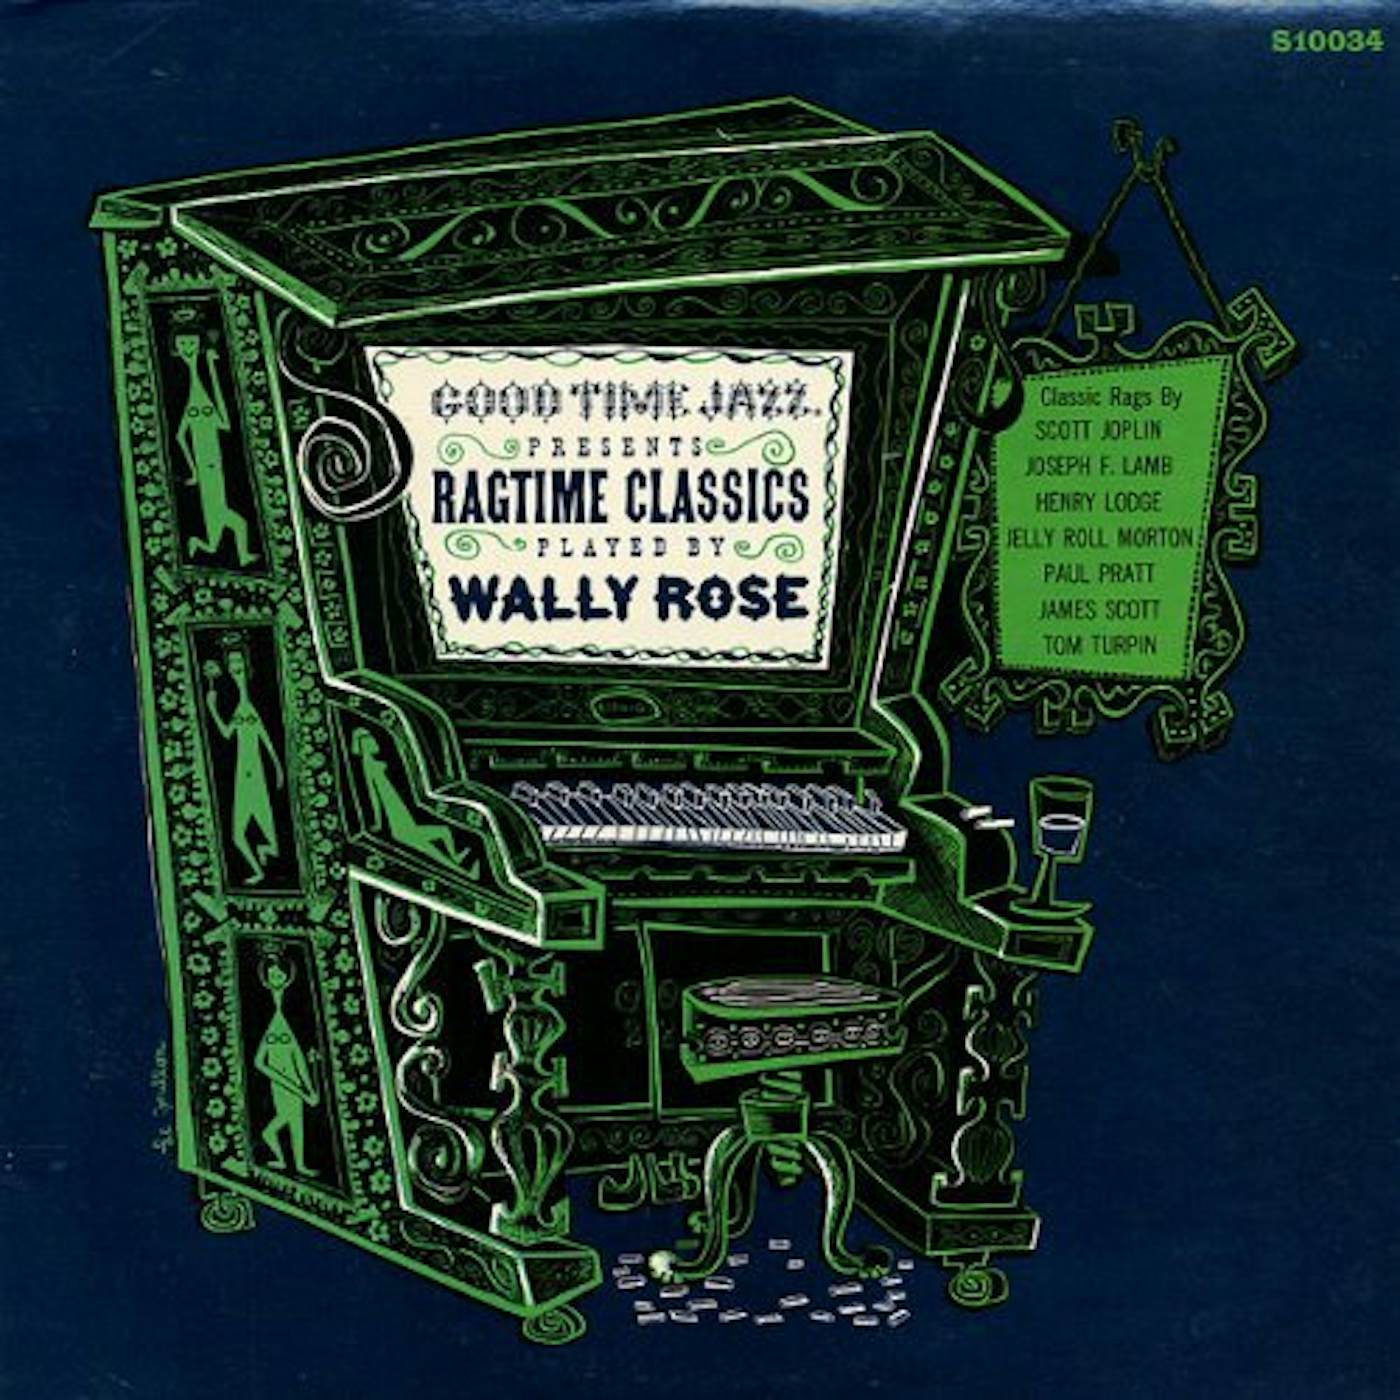 RAGTIME CLASSICS PLAYED BY WALLY ROSE Vinyl Record